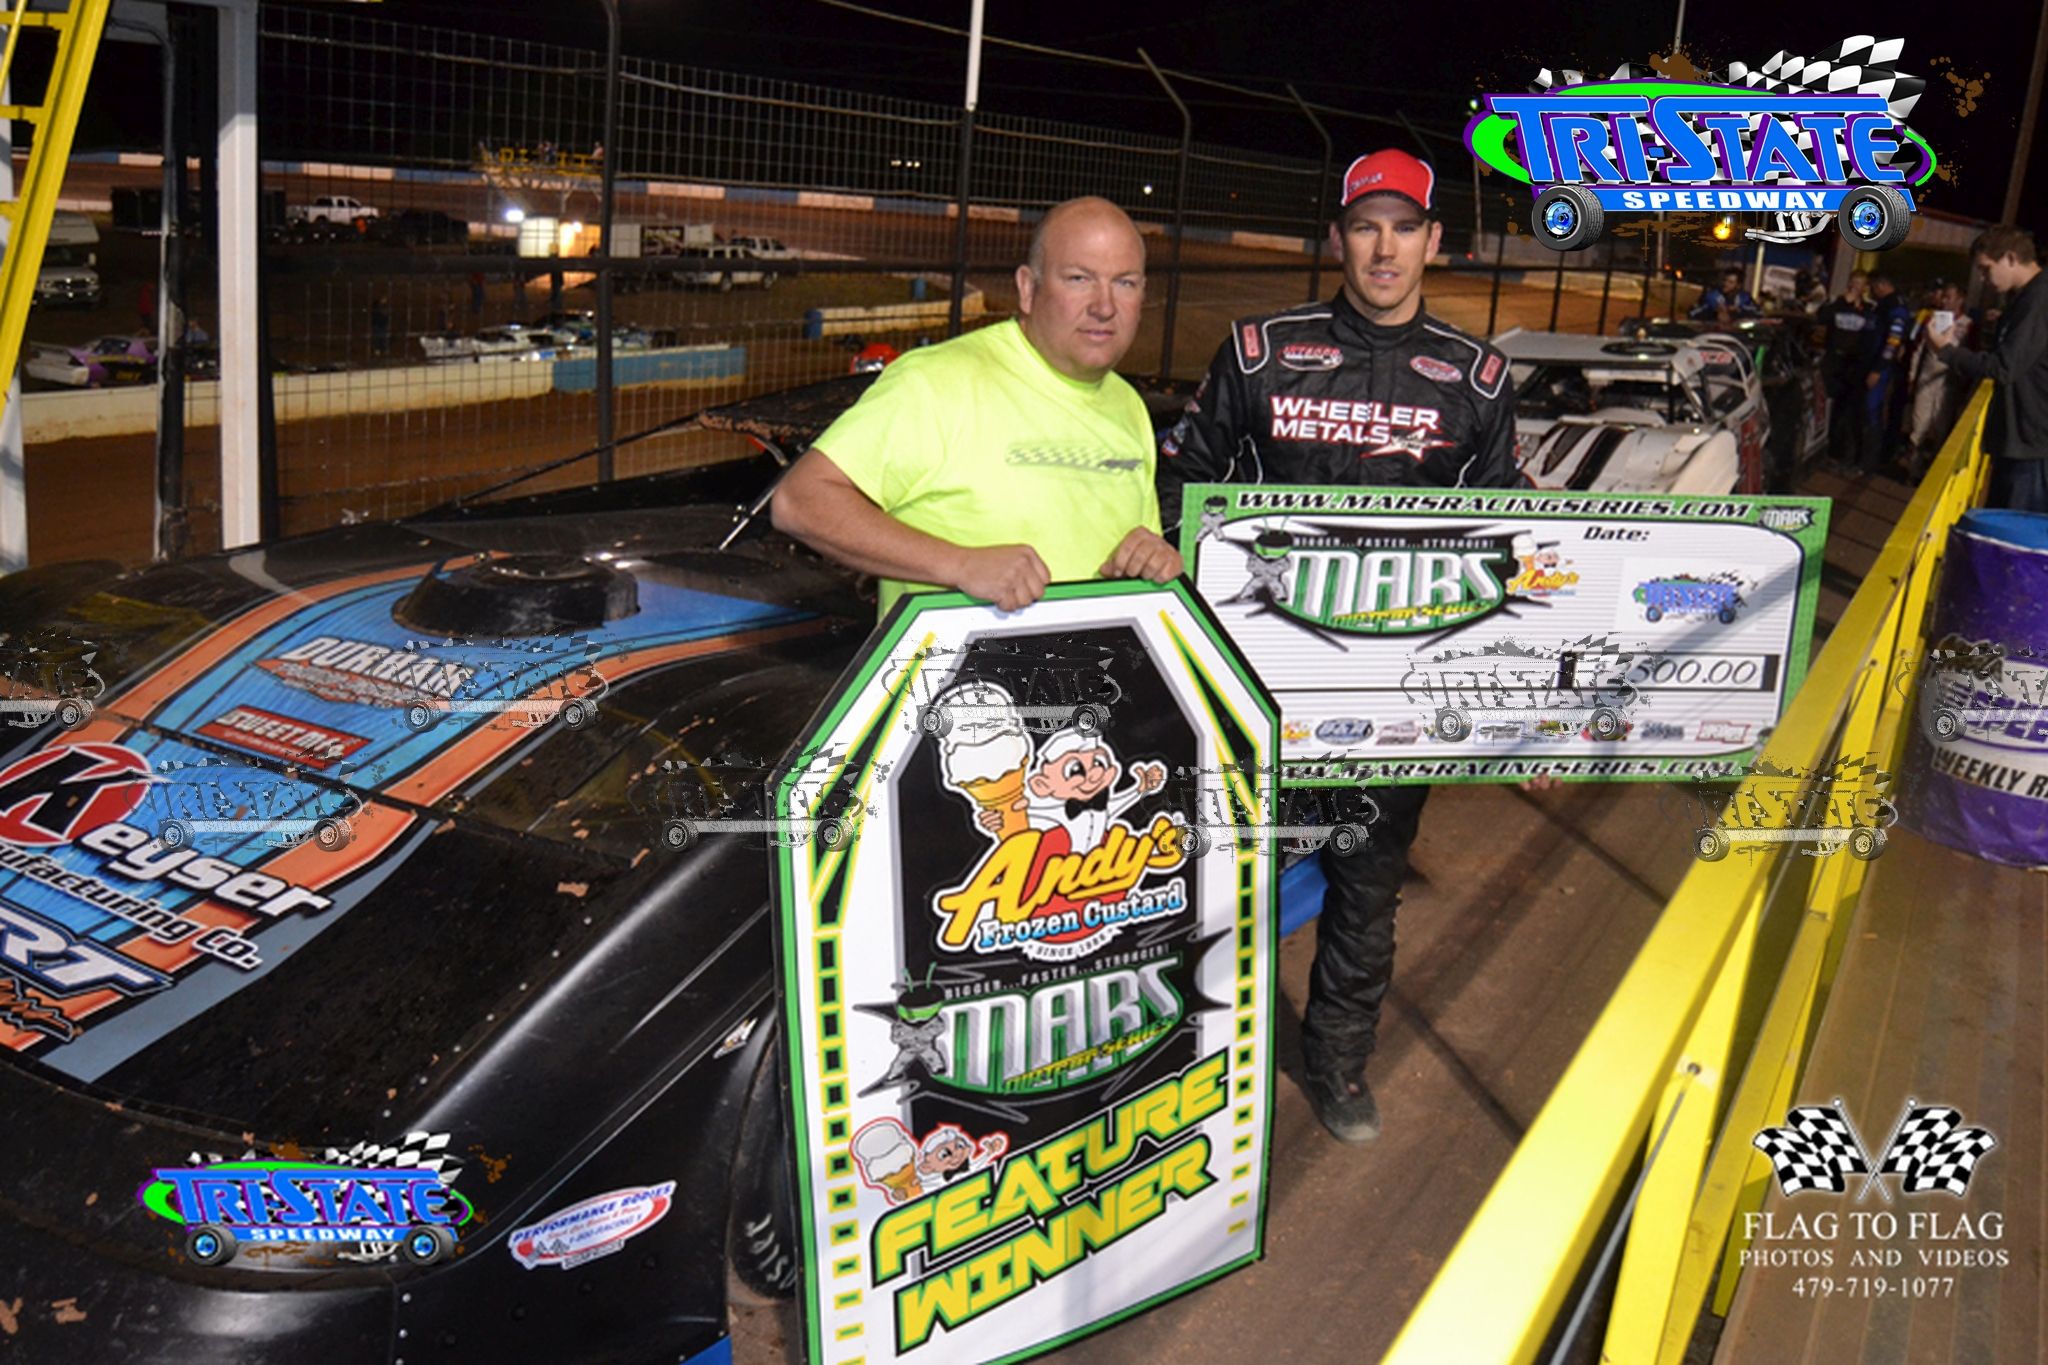 Johnston Wins 9 and Claims Championship